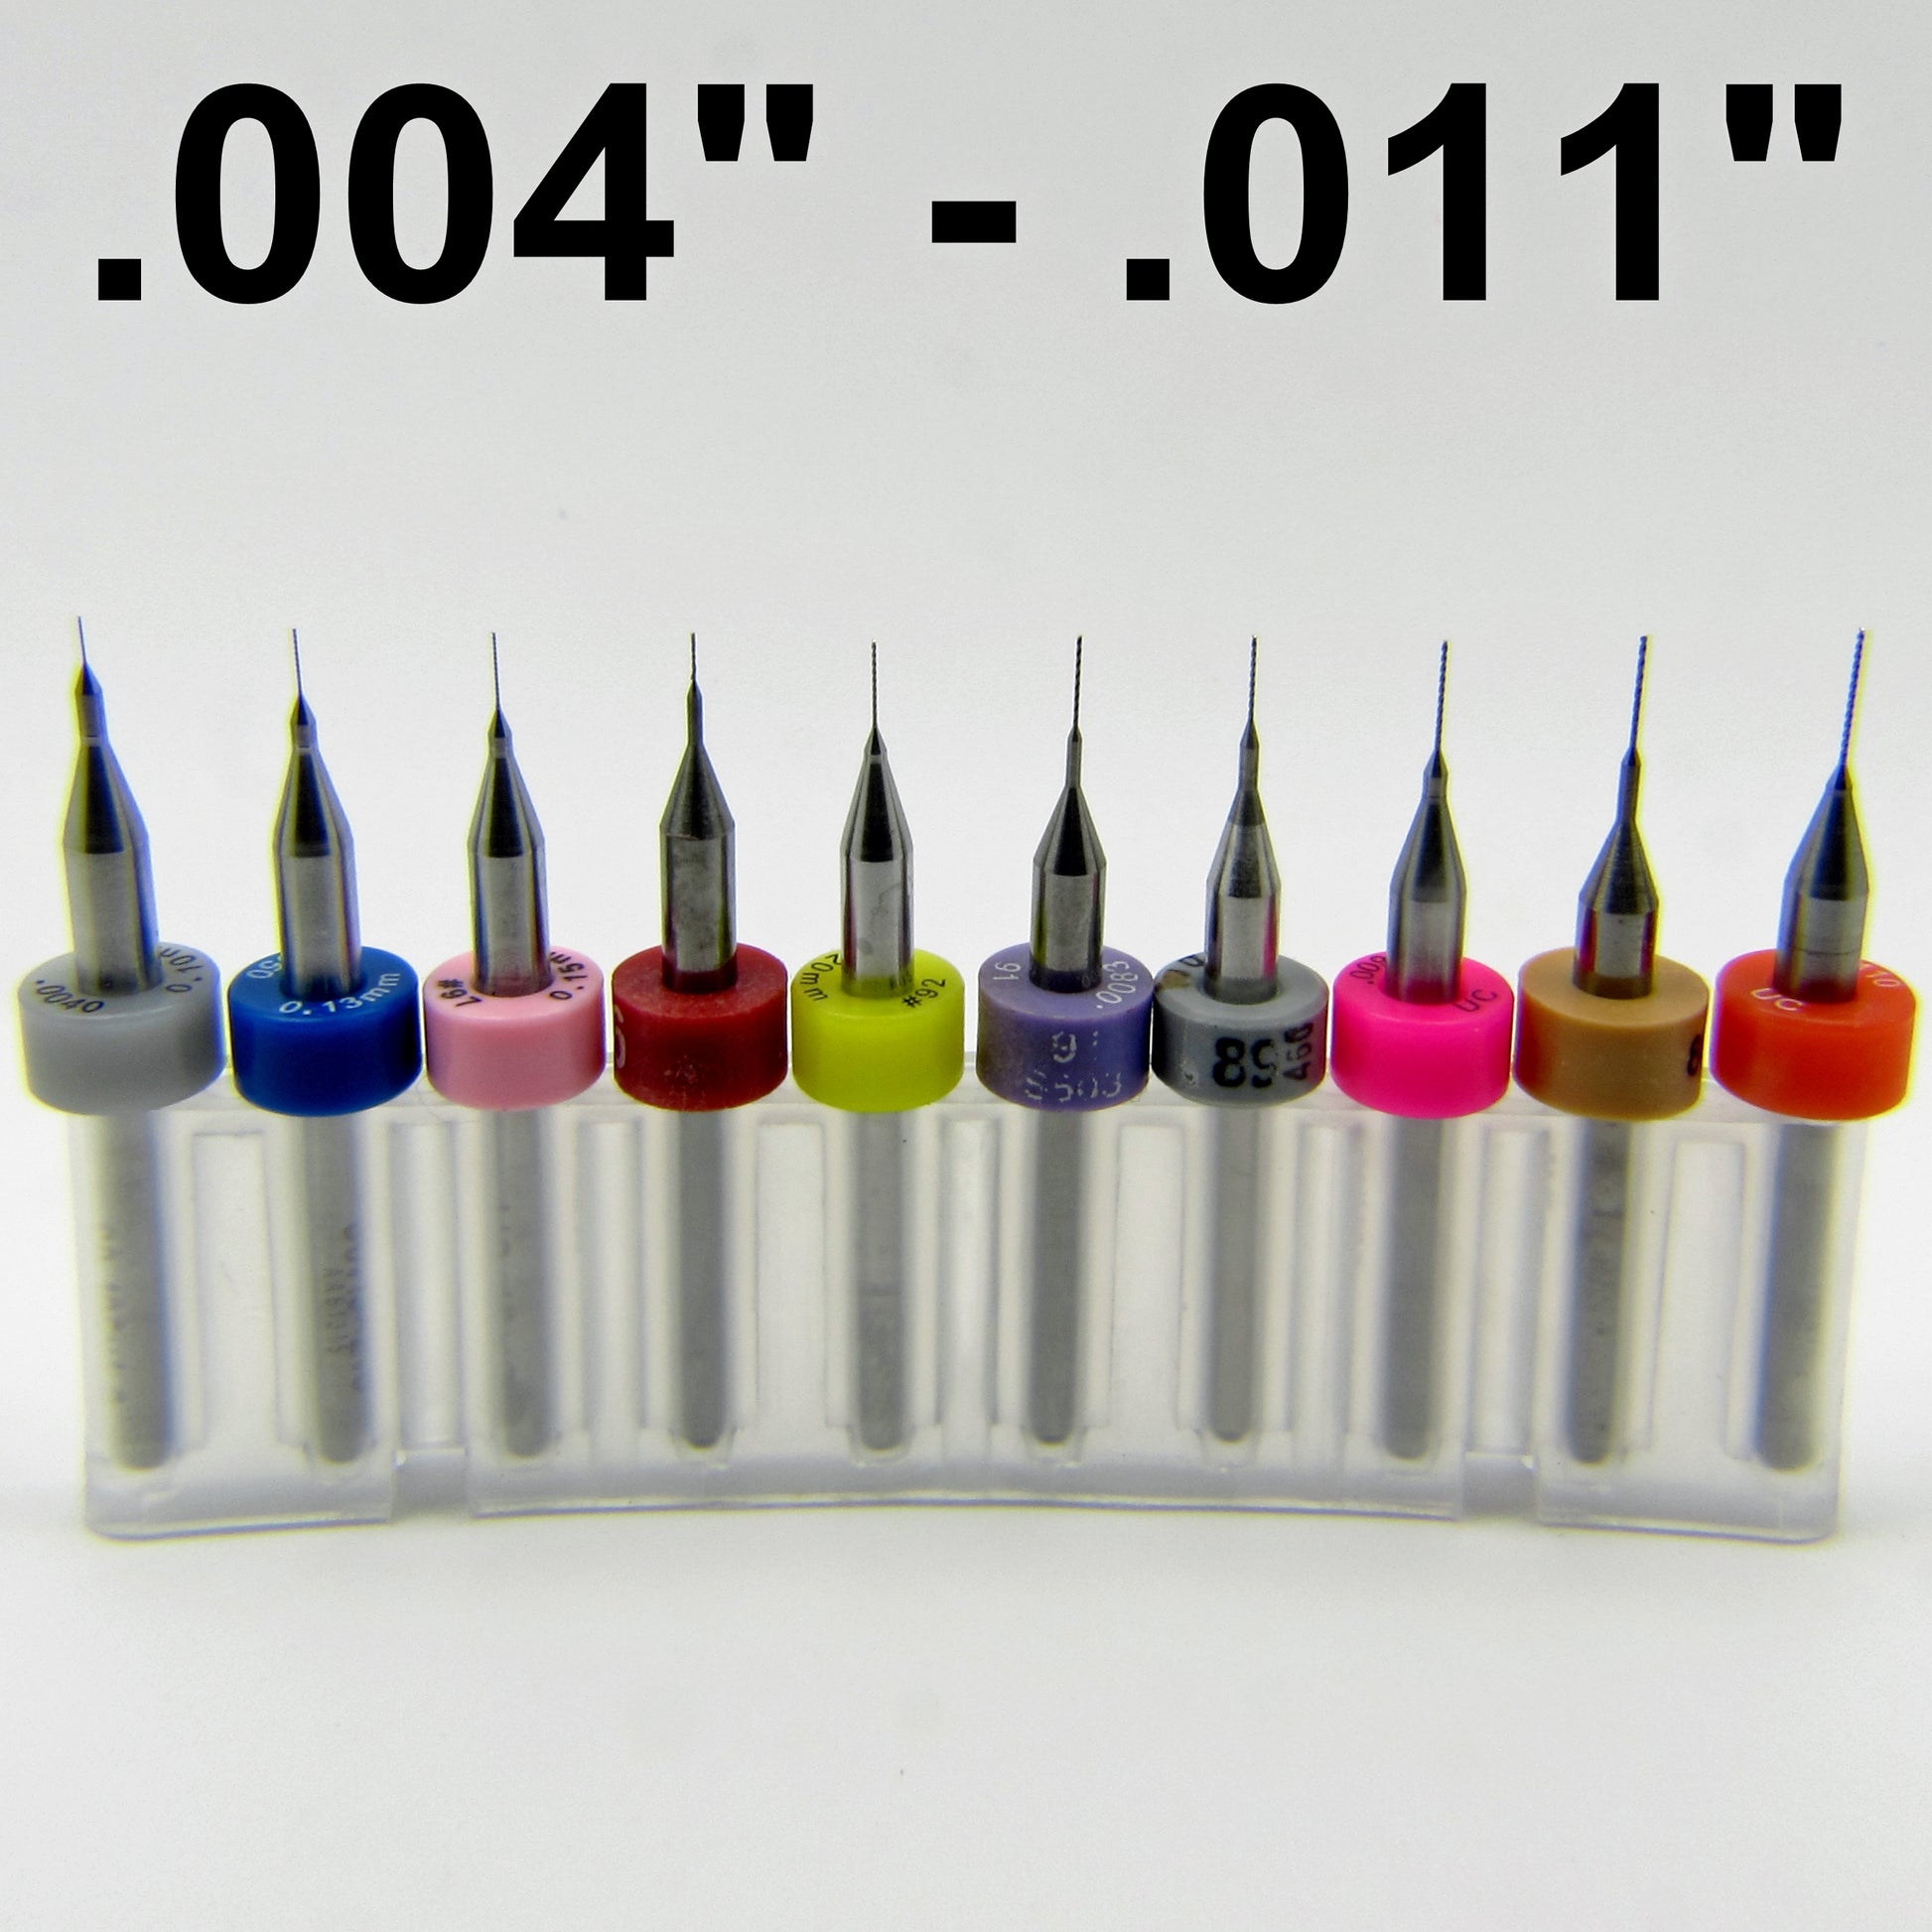 Incremental Size Solid Carbide Drill Set - Ten Pieces .004" - .011" ID00